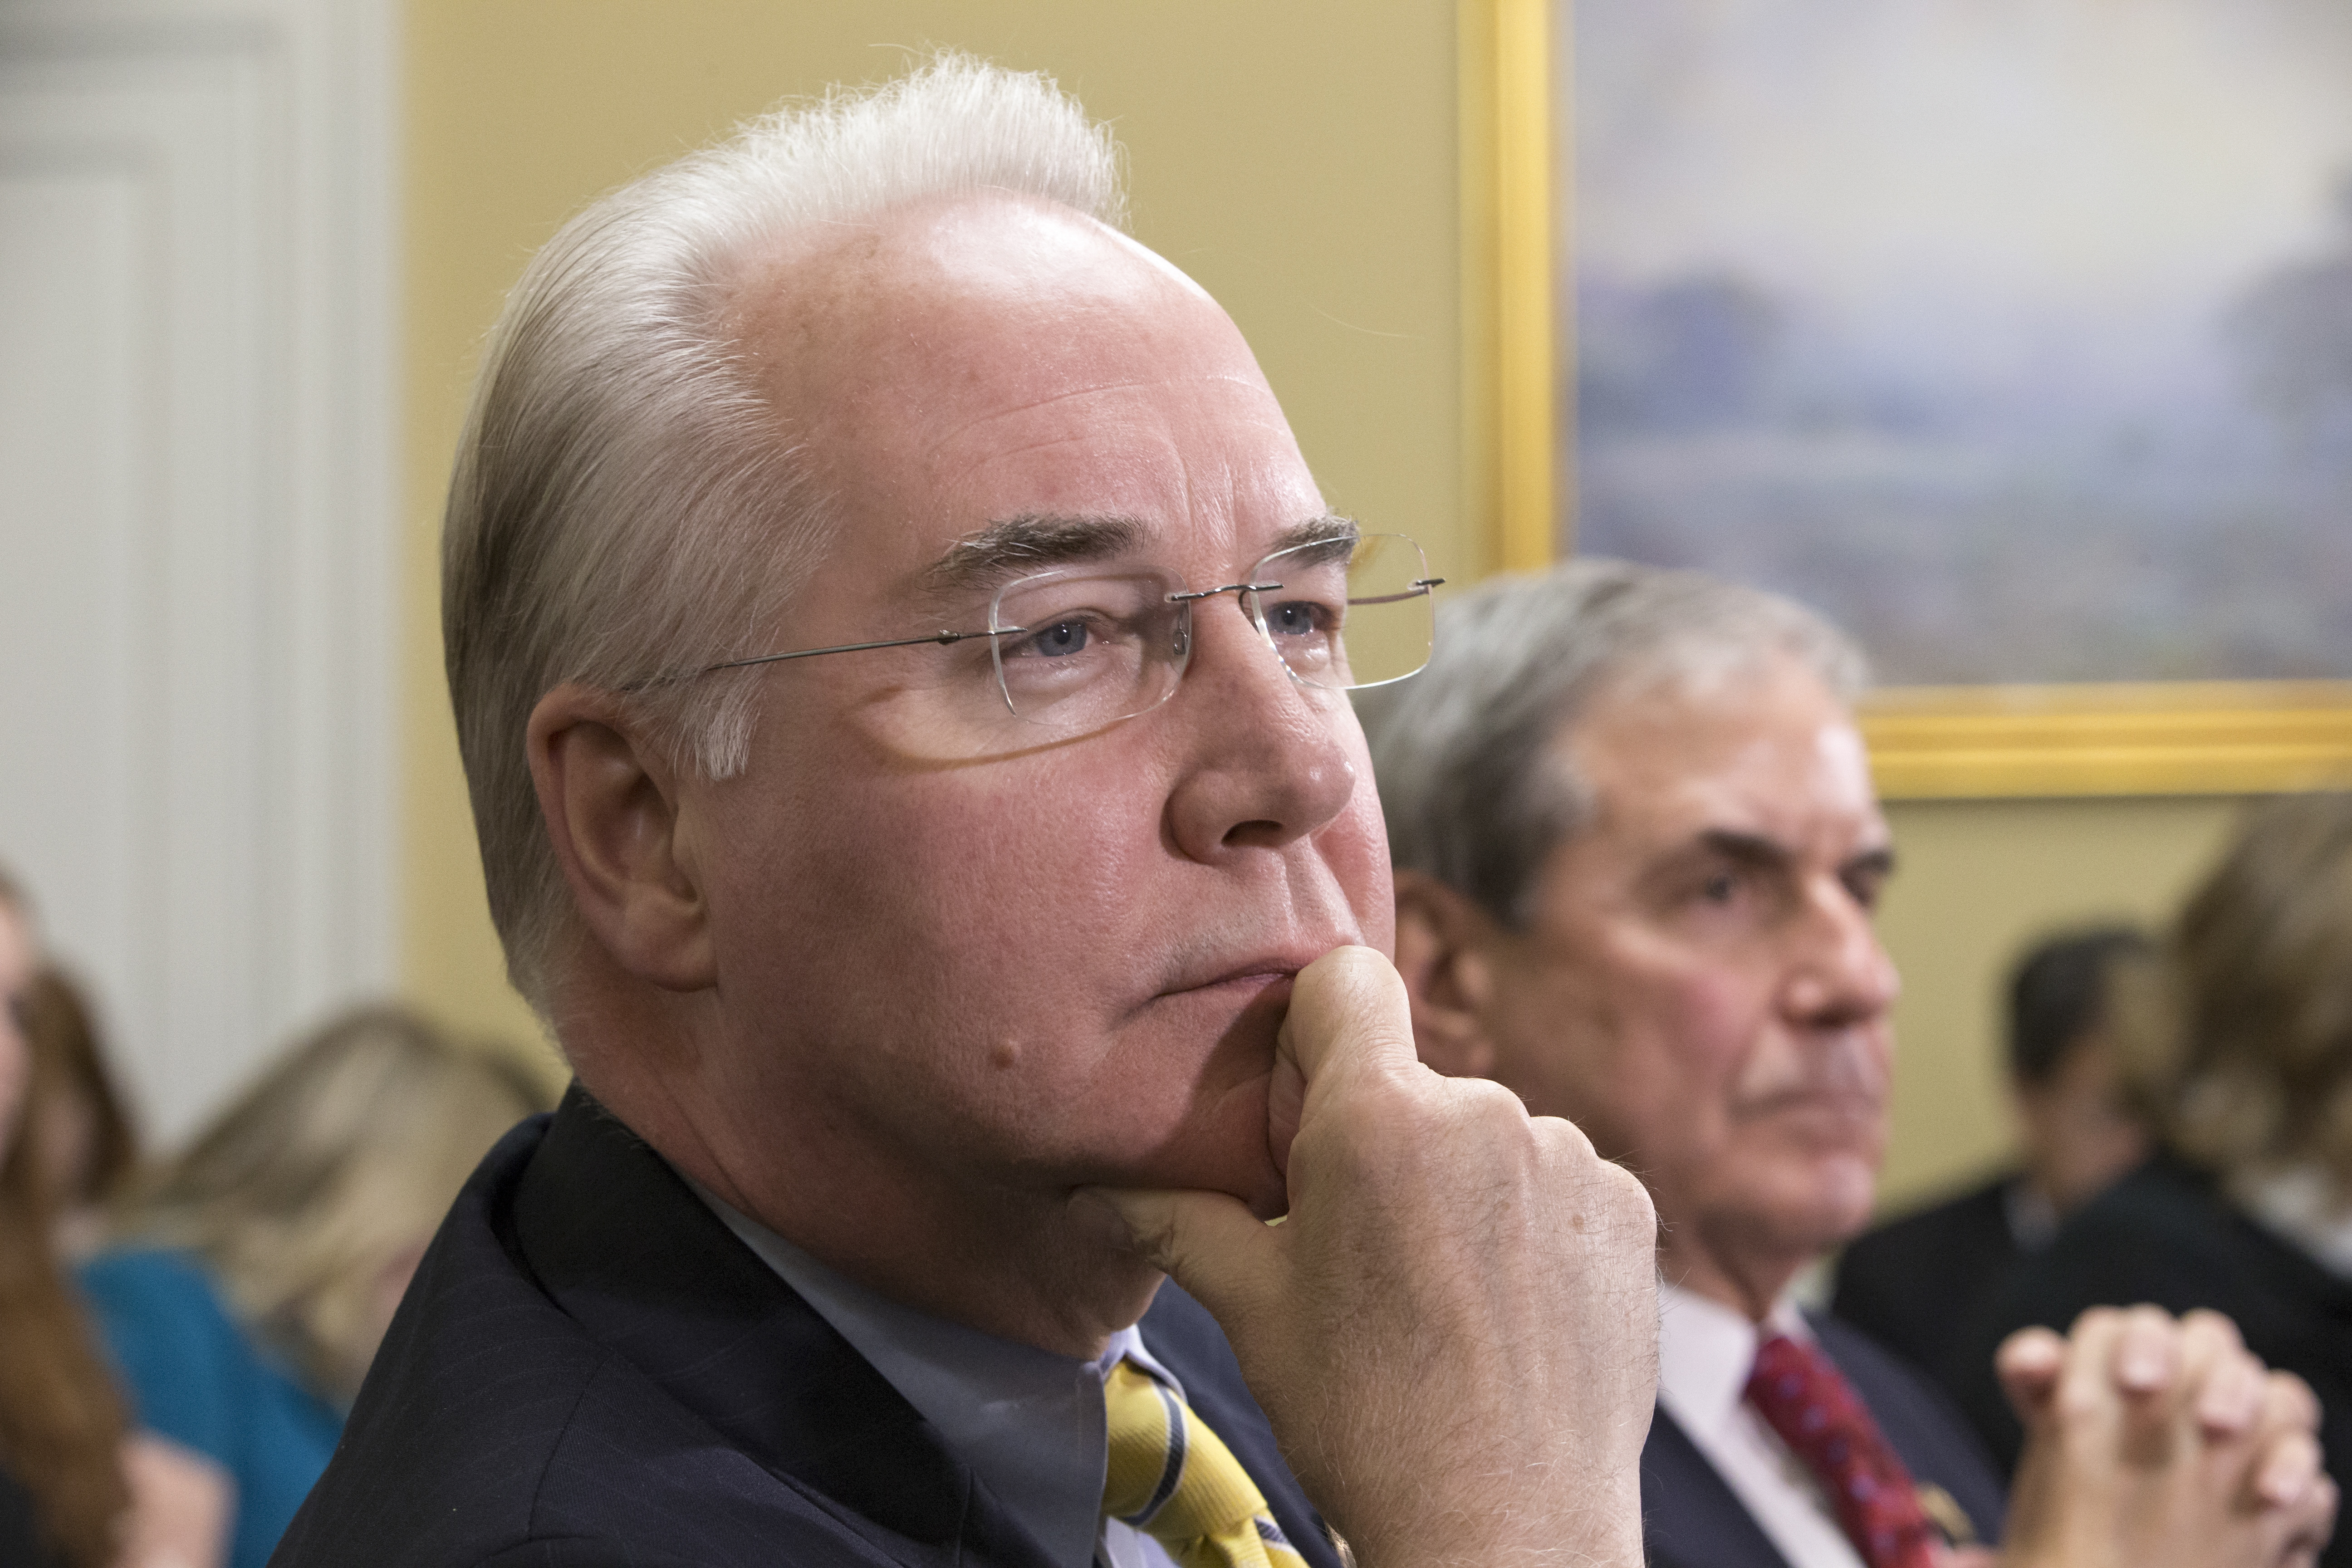 Rep. Tom Price, R-Ga., chairman of the House Budget Committee appears before the Rules Committee on Capitol Hill in Washington.  Republicans hope that as Trump's choice to run the Department of Health and Human Services, Price will preside over the dismantlement of President Barack Obama's signature health care law.    (AP Photo/J. Scott Applewhite, File)